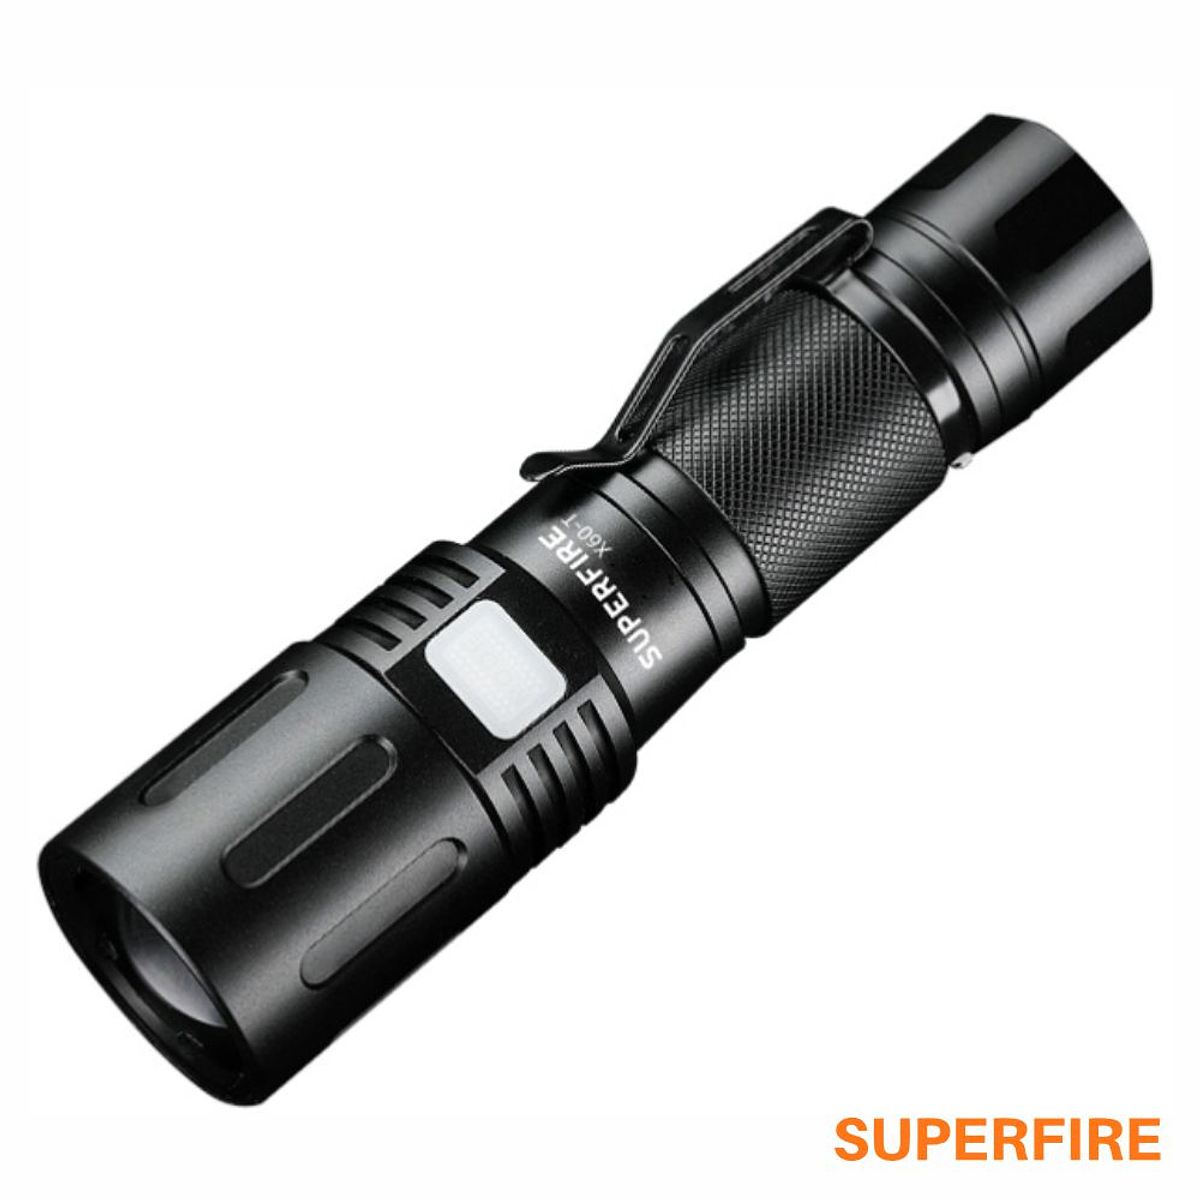 LANTERN WITH 1LED XPE 10W 5 LIGHT LEVELS ZOOM 800LM WELL